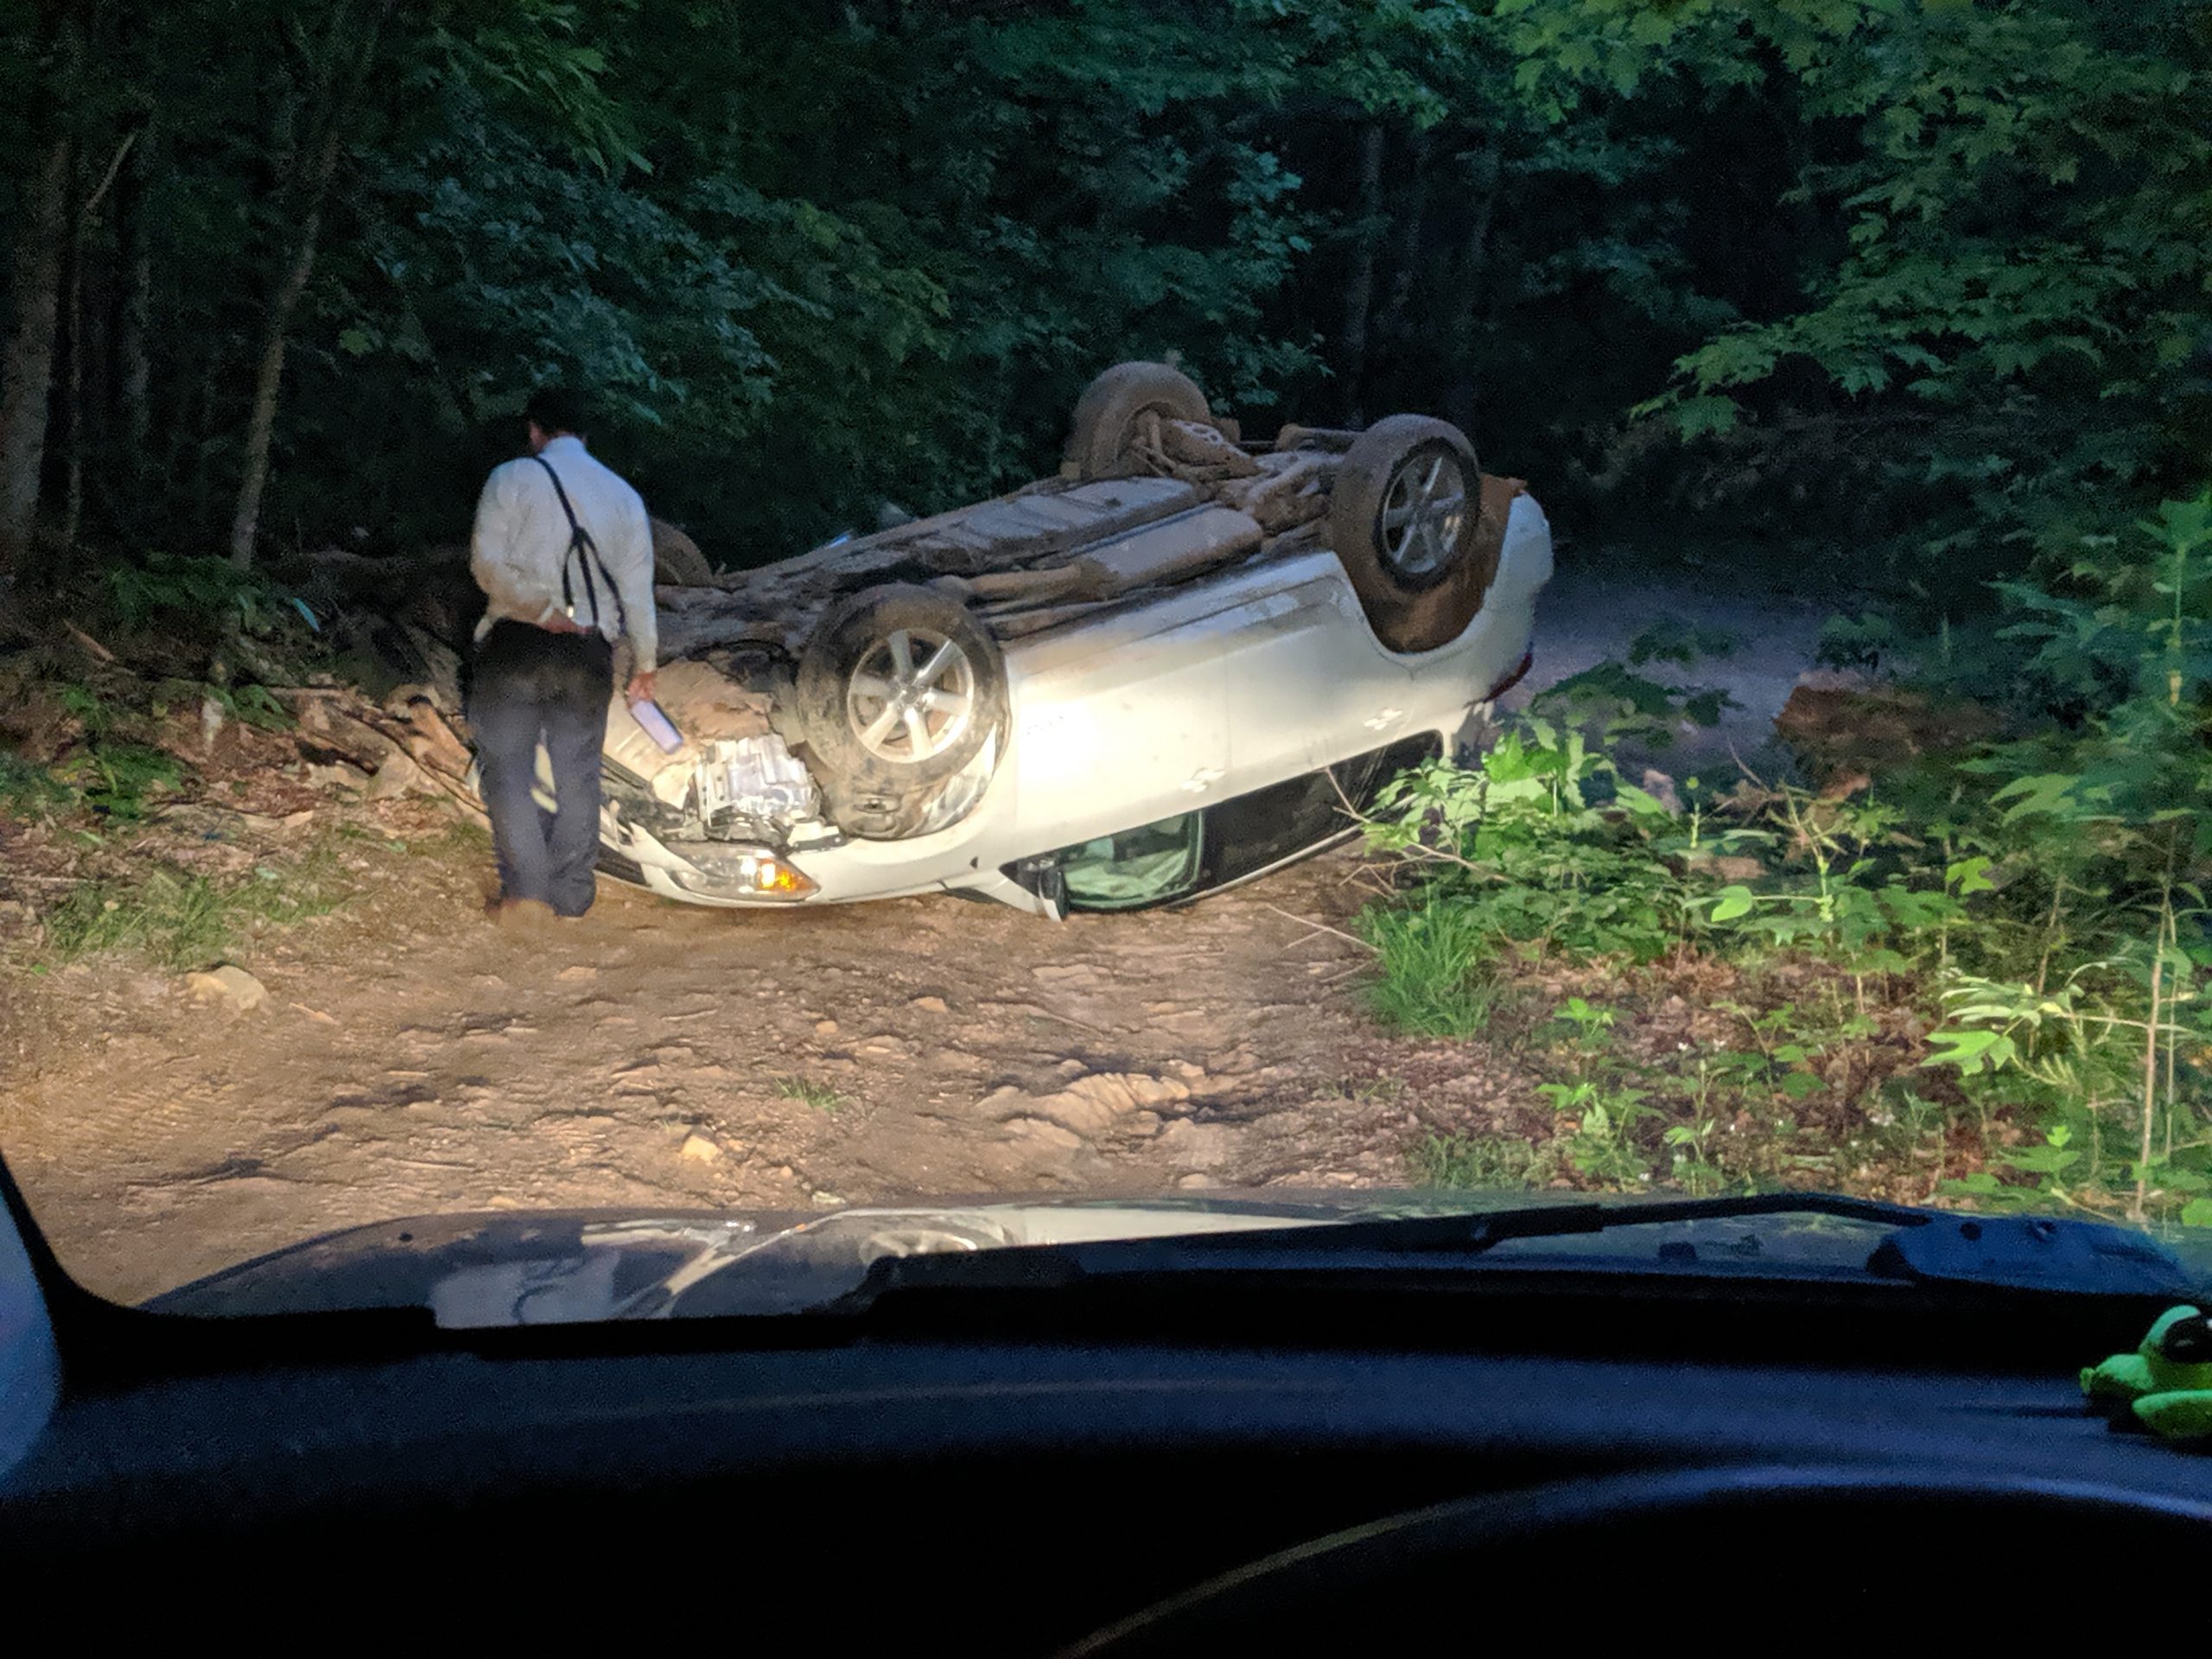 Vehicle rollover on an off road trail